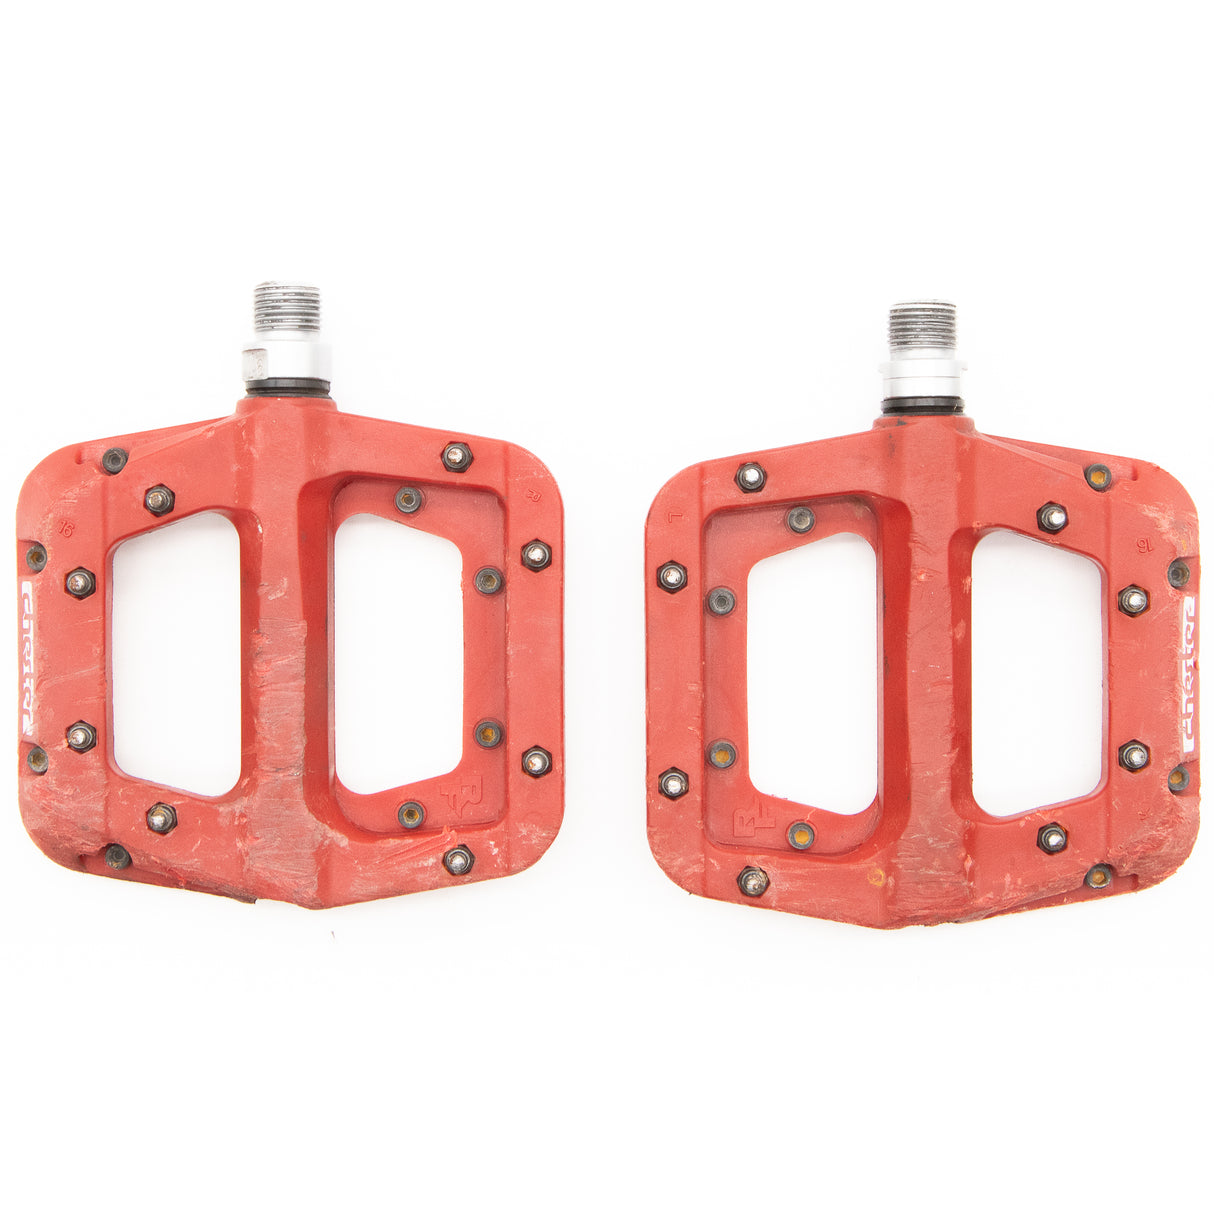 RaceFace Chester Flat Red MTB Pedals 358g